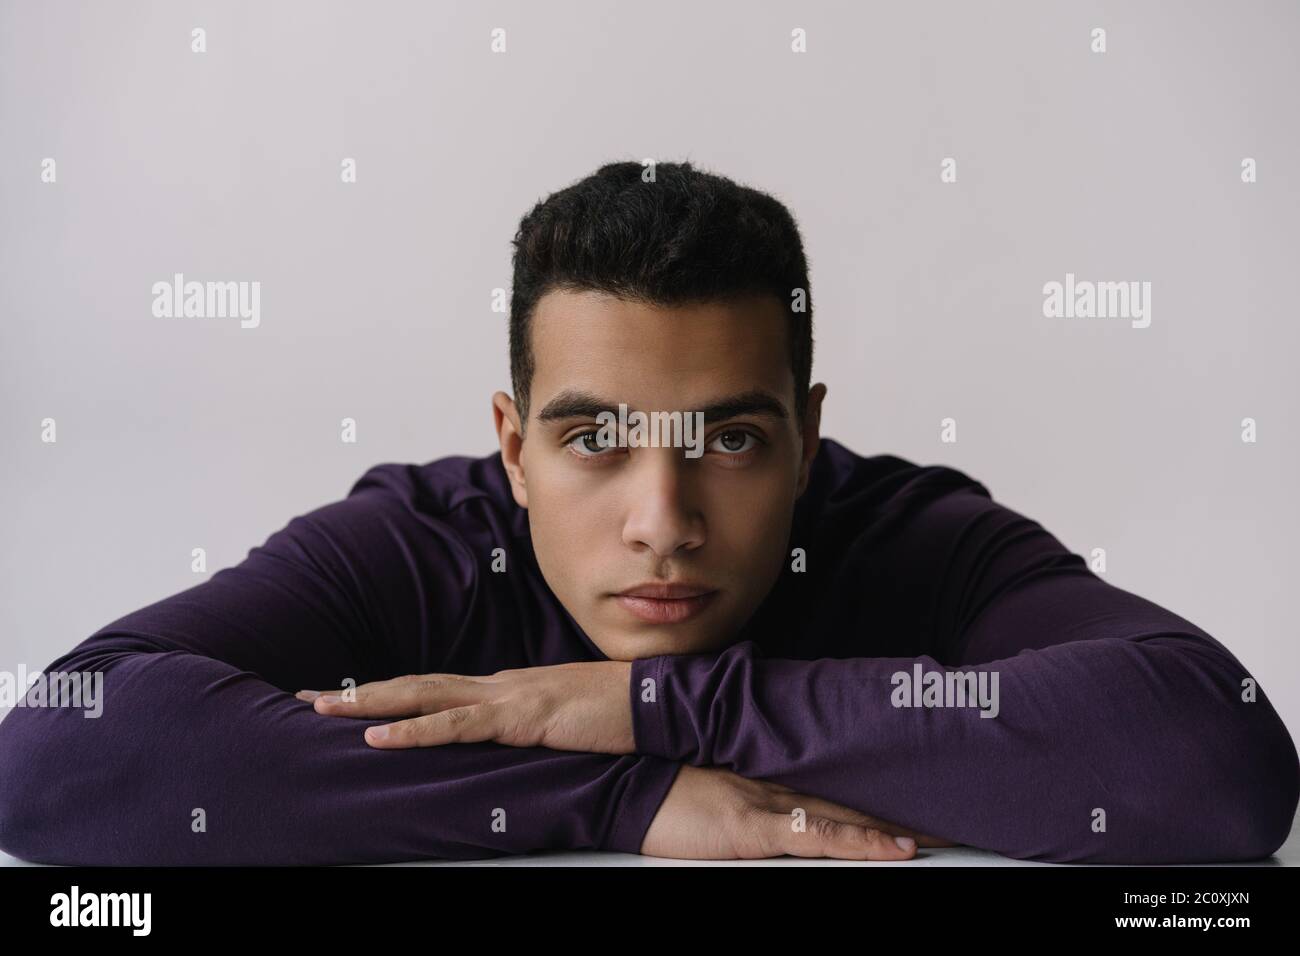 Portrait of serious African American actor posing for pictures in studio isolated on background. Model wearing stylish turtleneck looking at camera Stock Photo